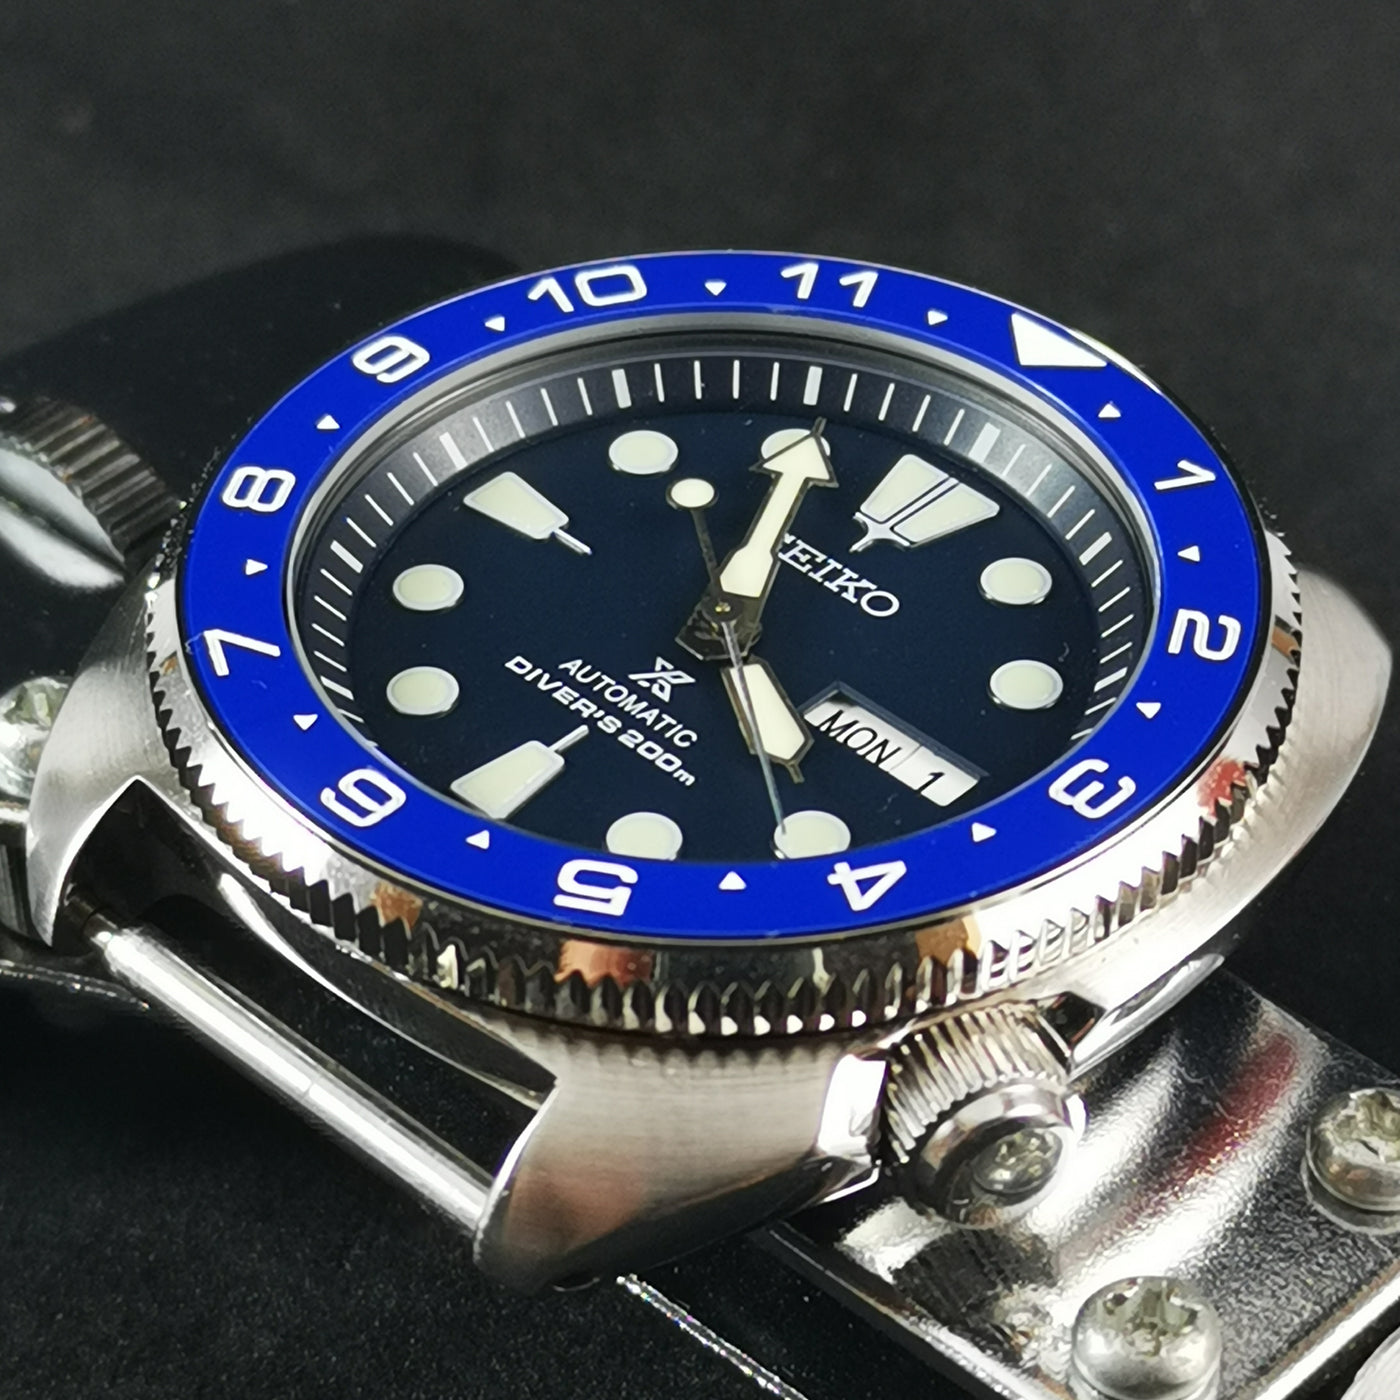 CI0052 SRP Turtle Re-issue Ceramic Bezel Insert - Blue Dual Time